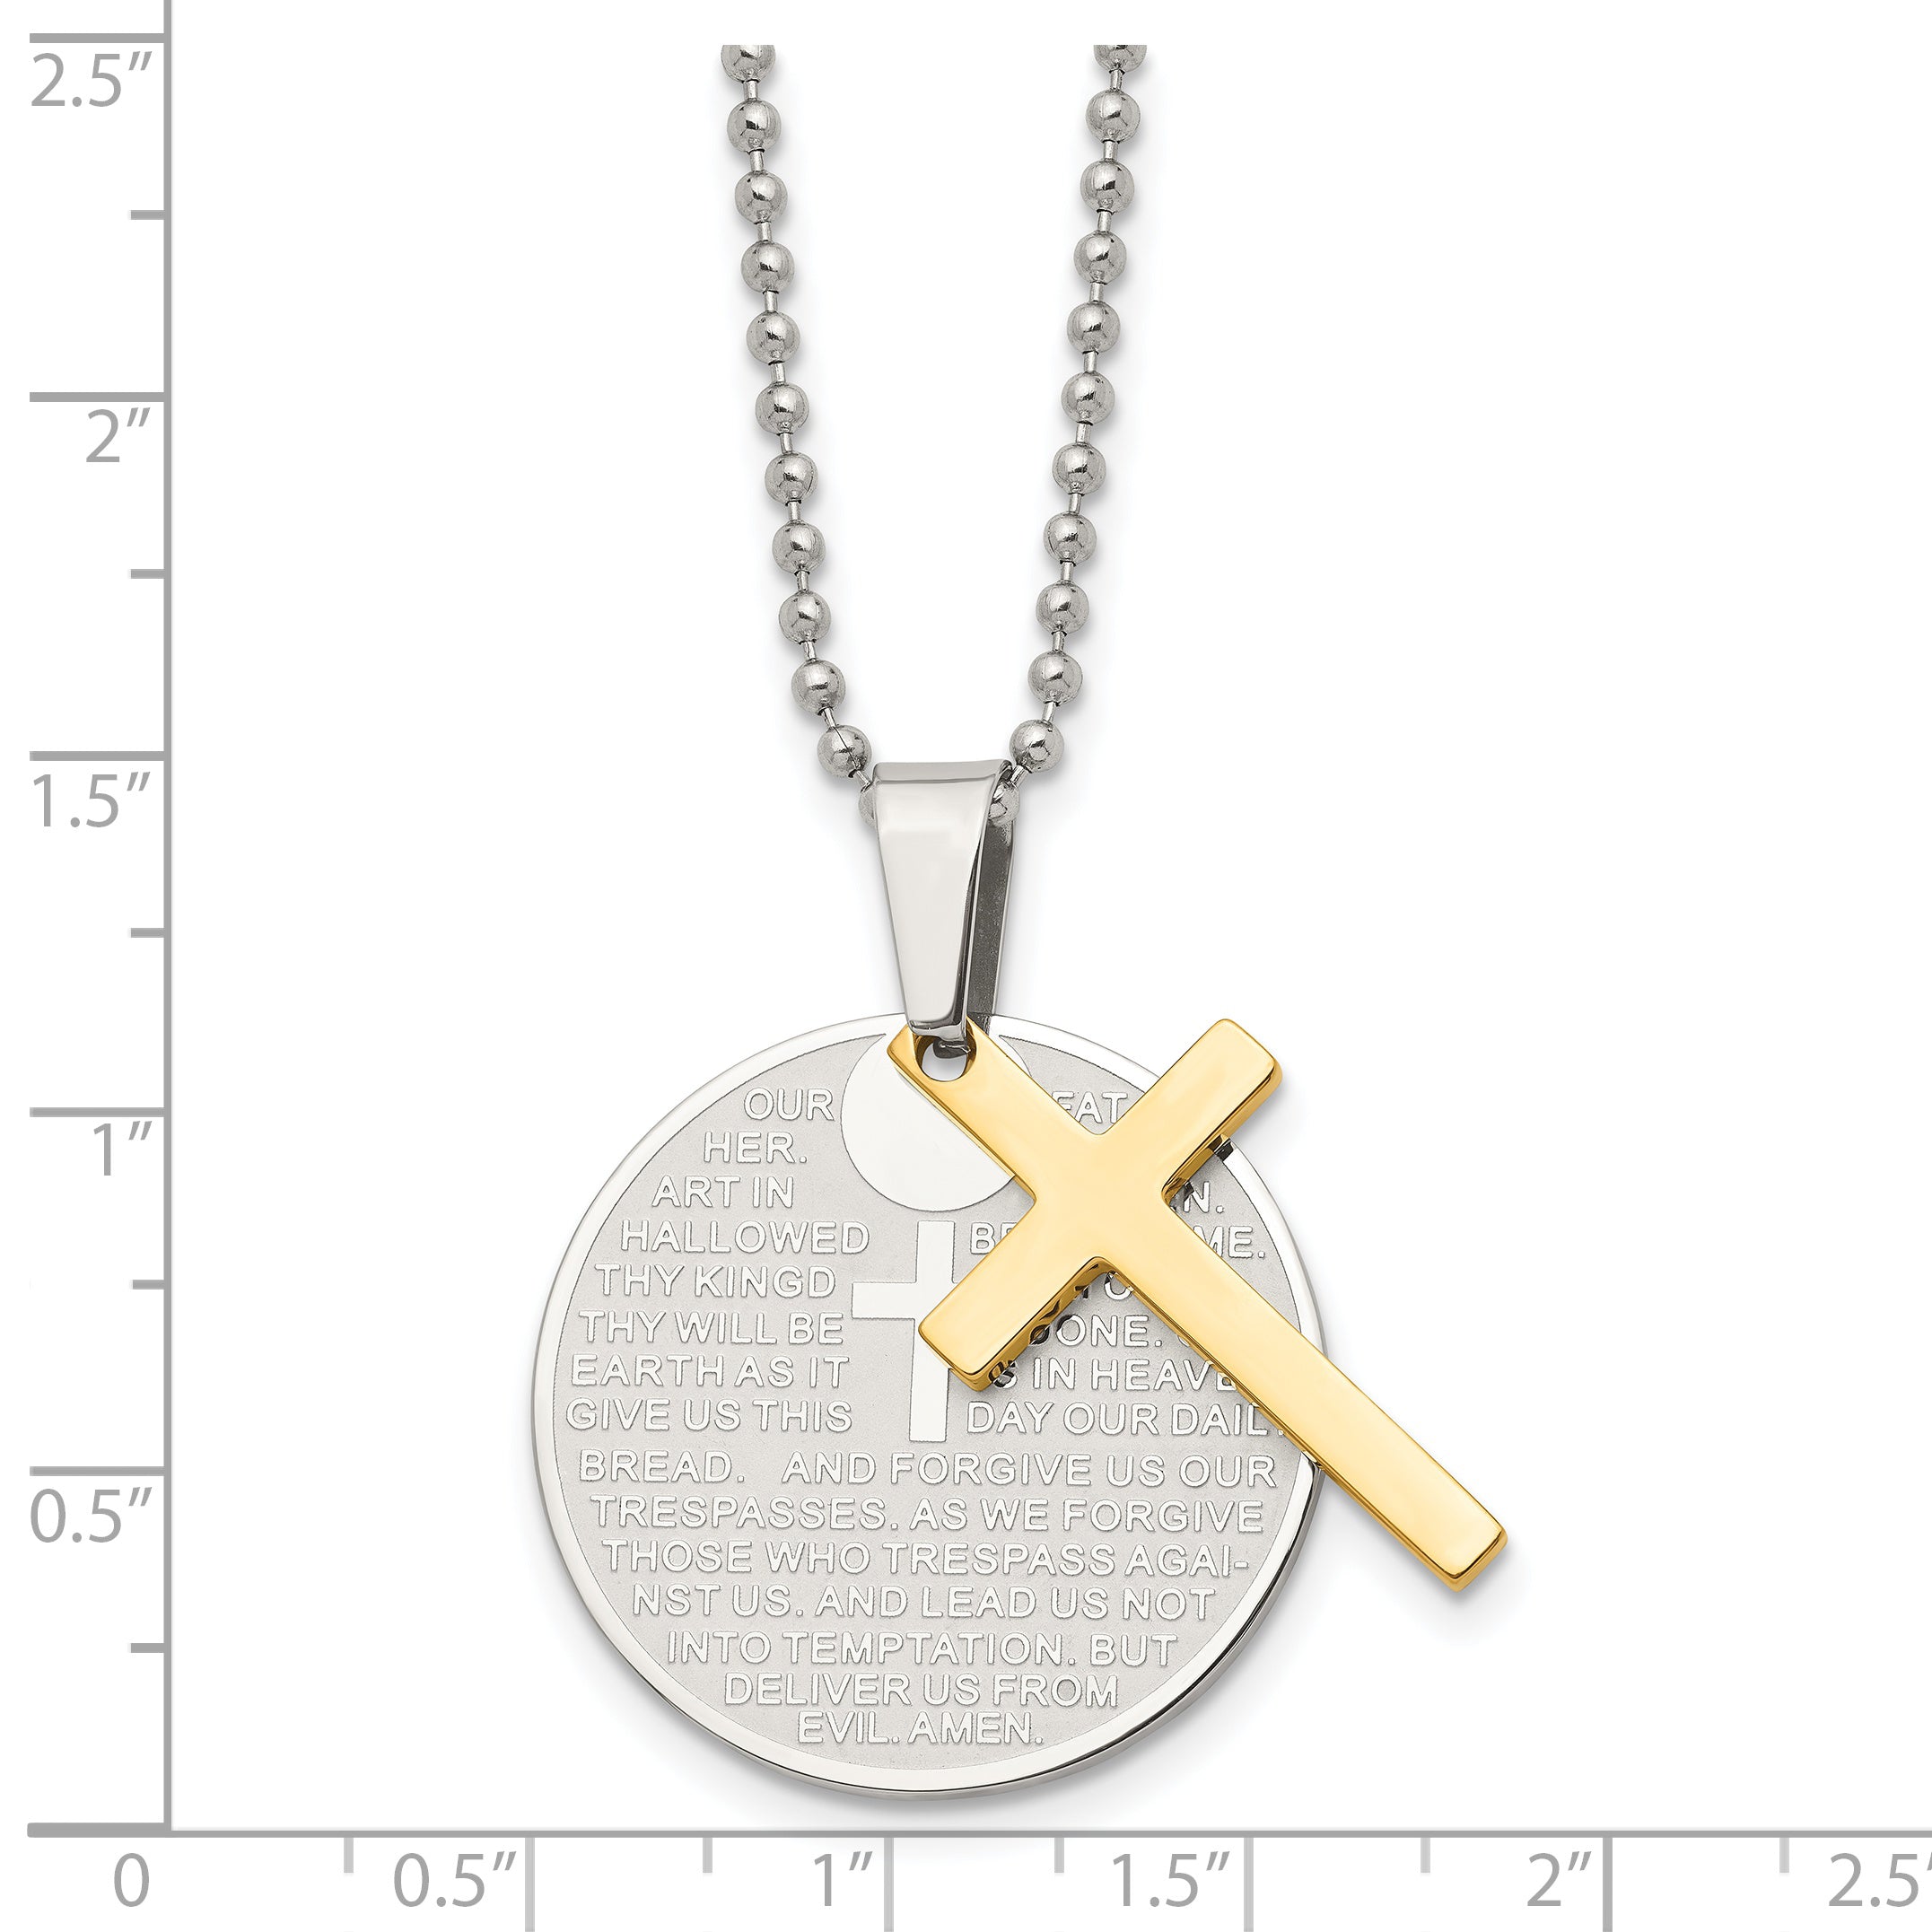 Chisel Stainless Steel Brushedand Polished Yellow IP-plated 2 Piece Lords Prayer Cross on a 20 inch Ball Chain Necklace